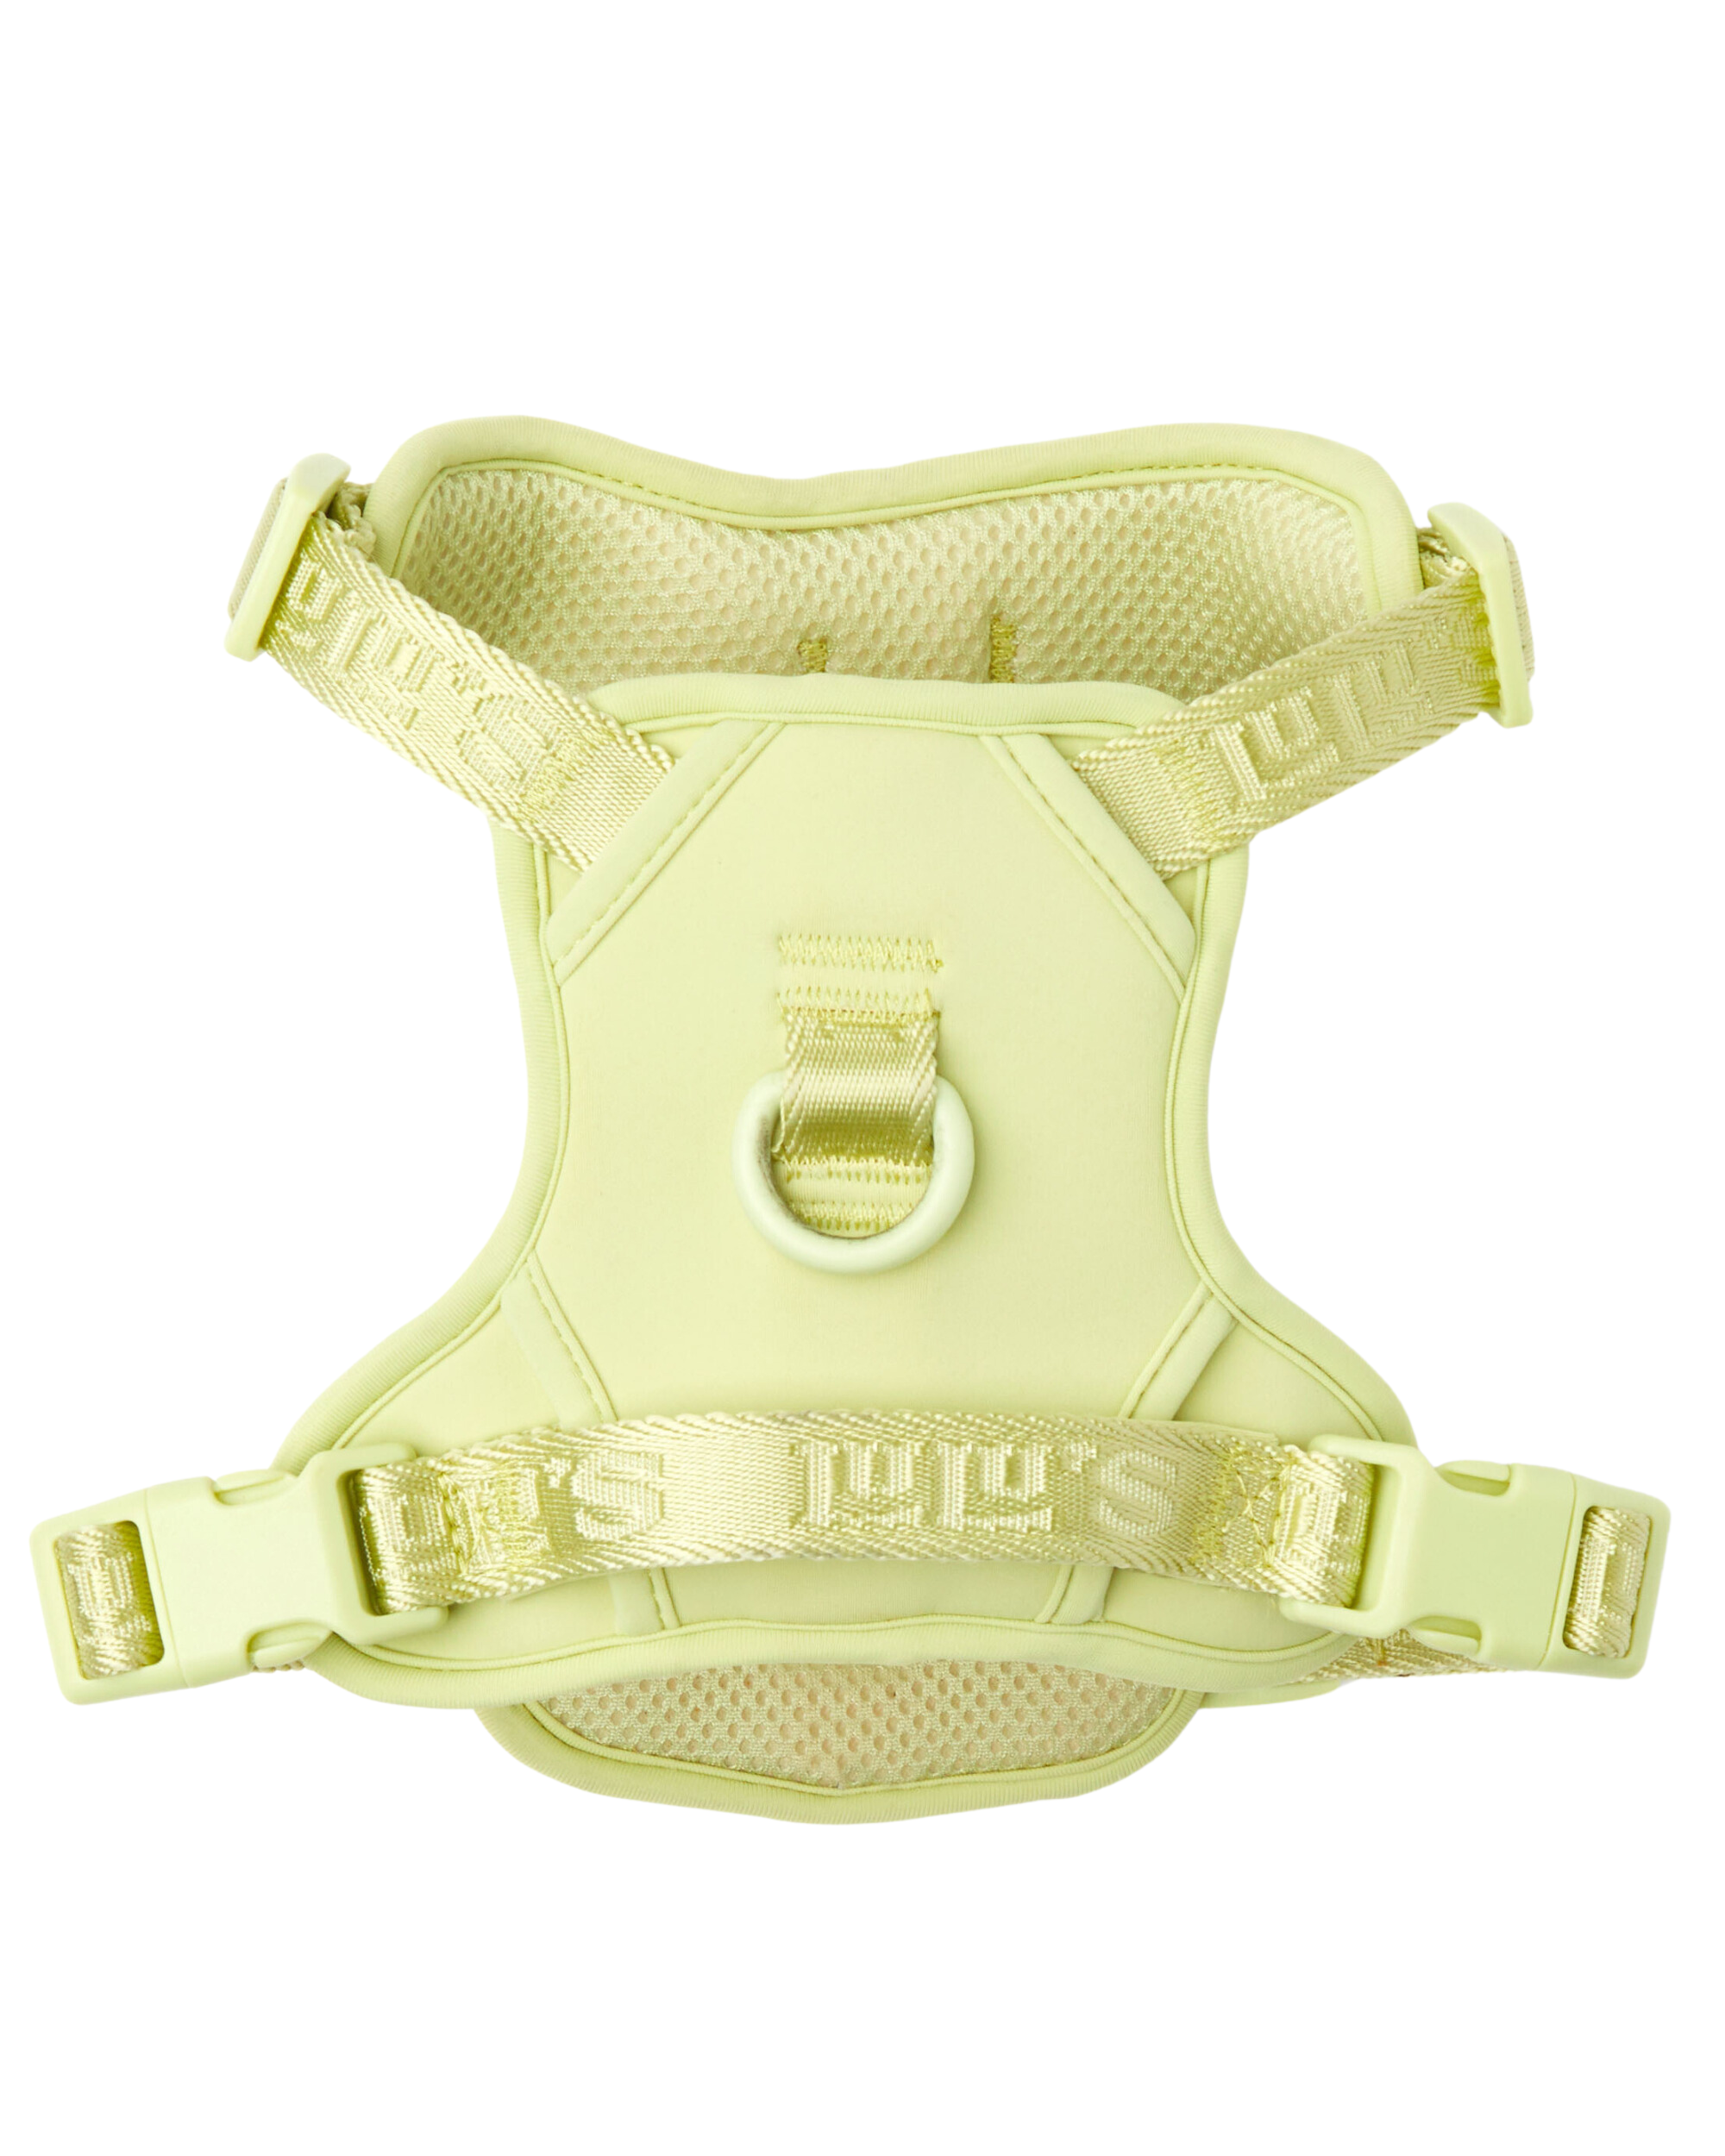 Close-up of a Matcha Green dog harness by Lulu's, featuring adjustable straps and a durable D-ring for leash attachment. The harness is designed with breathable mesh fabric for comfort.